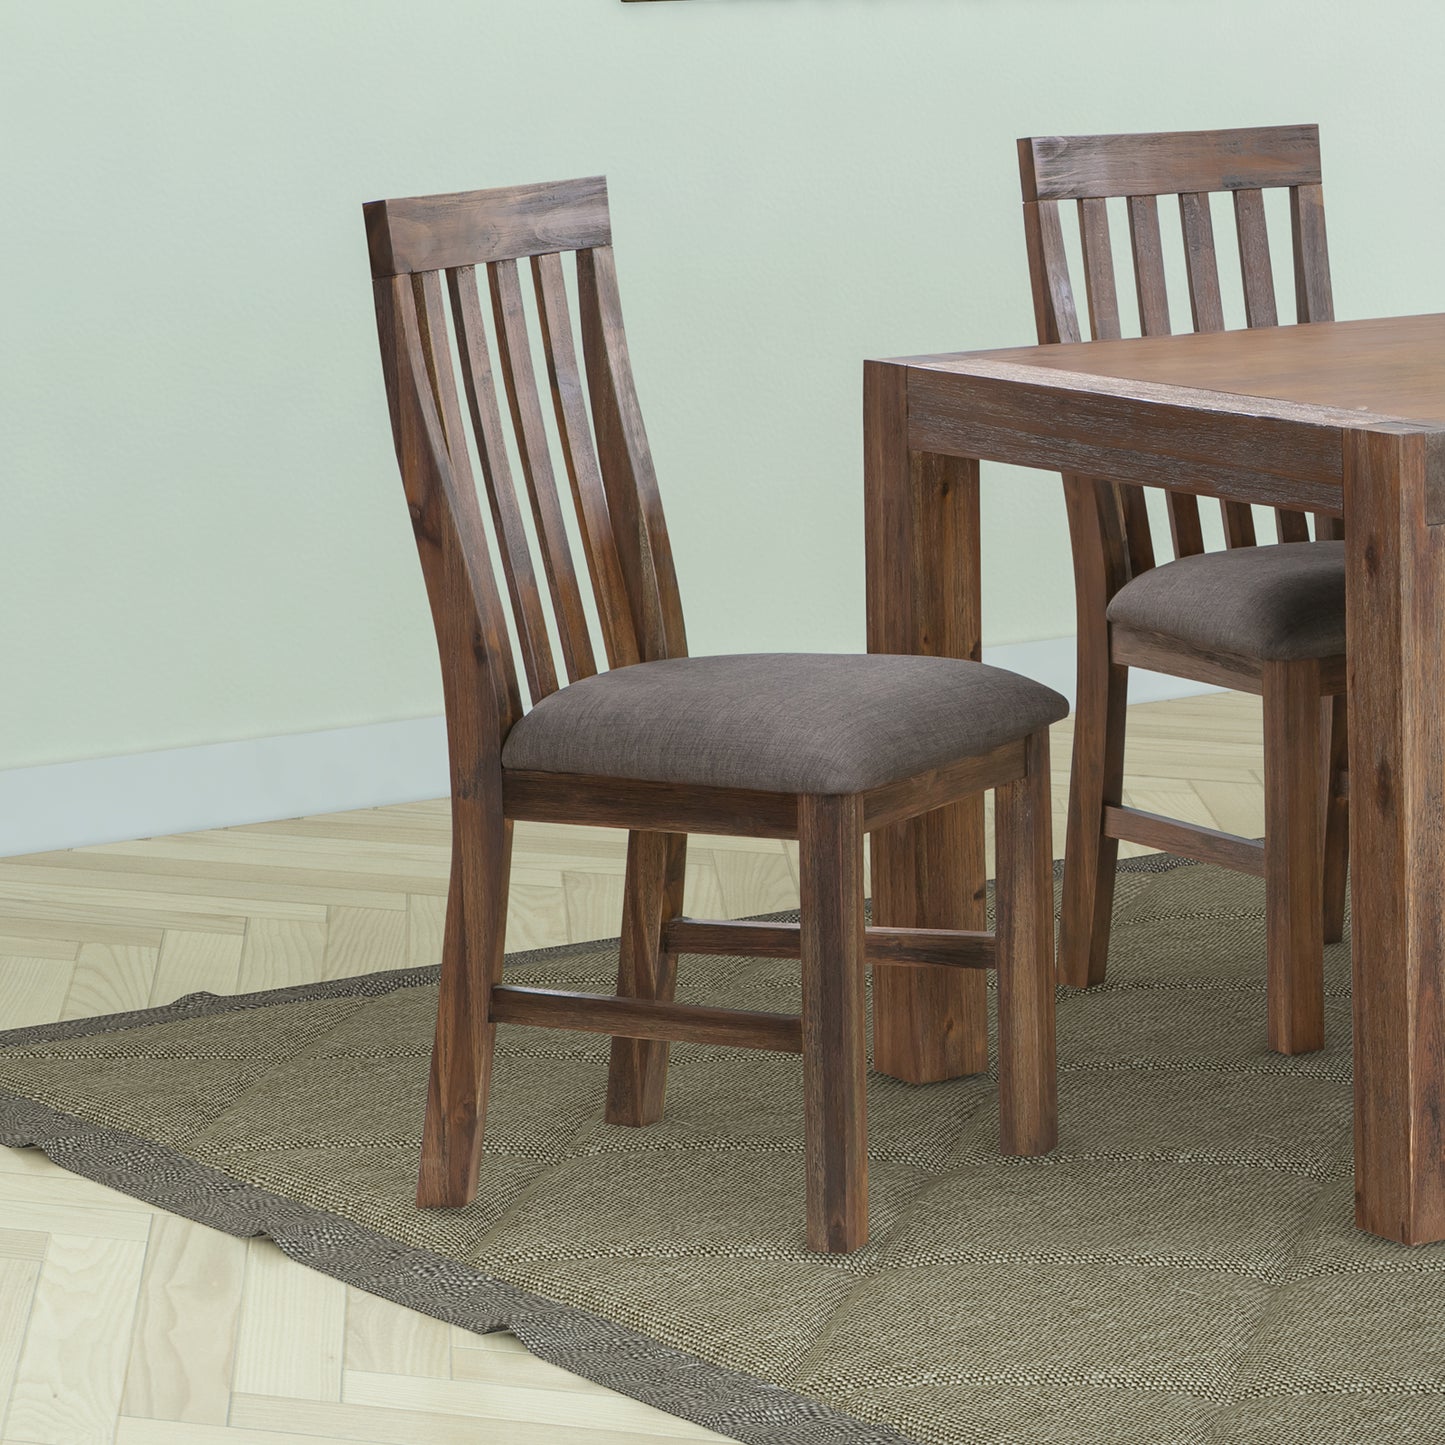 2x Wooden Frame Leatherette in Solid Wood Acacia & Veneer Dining Chairs in Chocolate Colour - image1